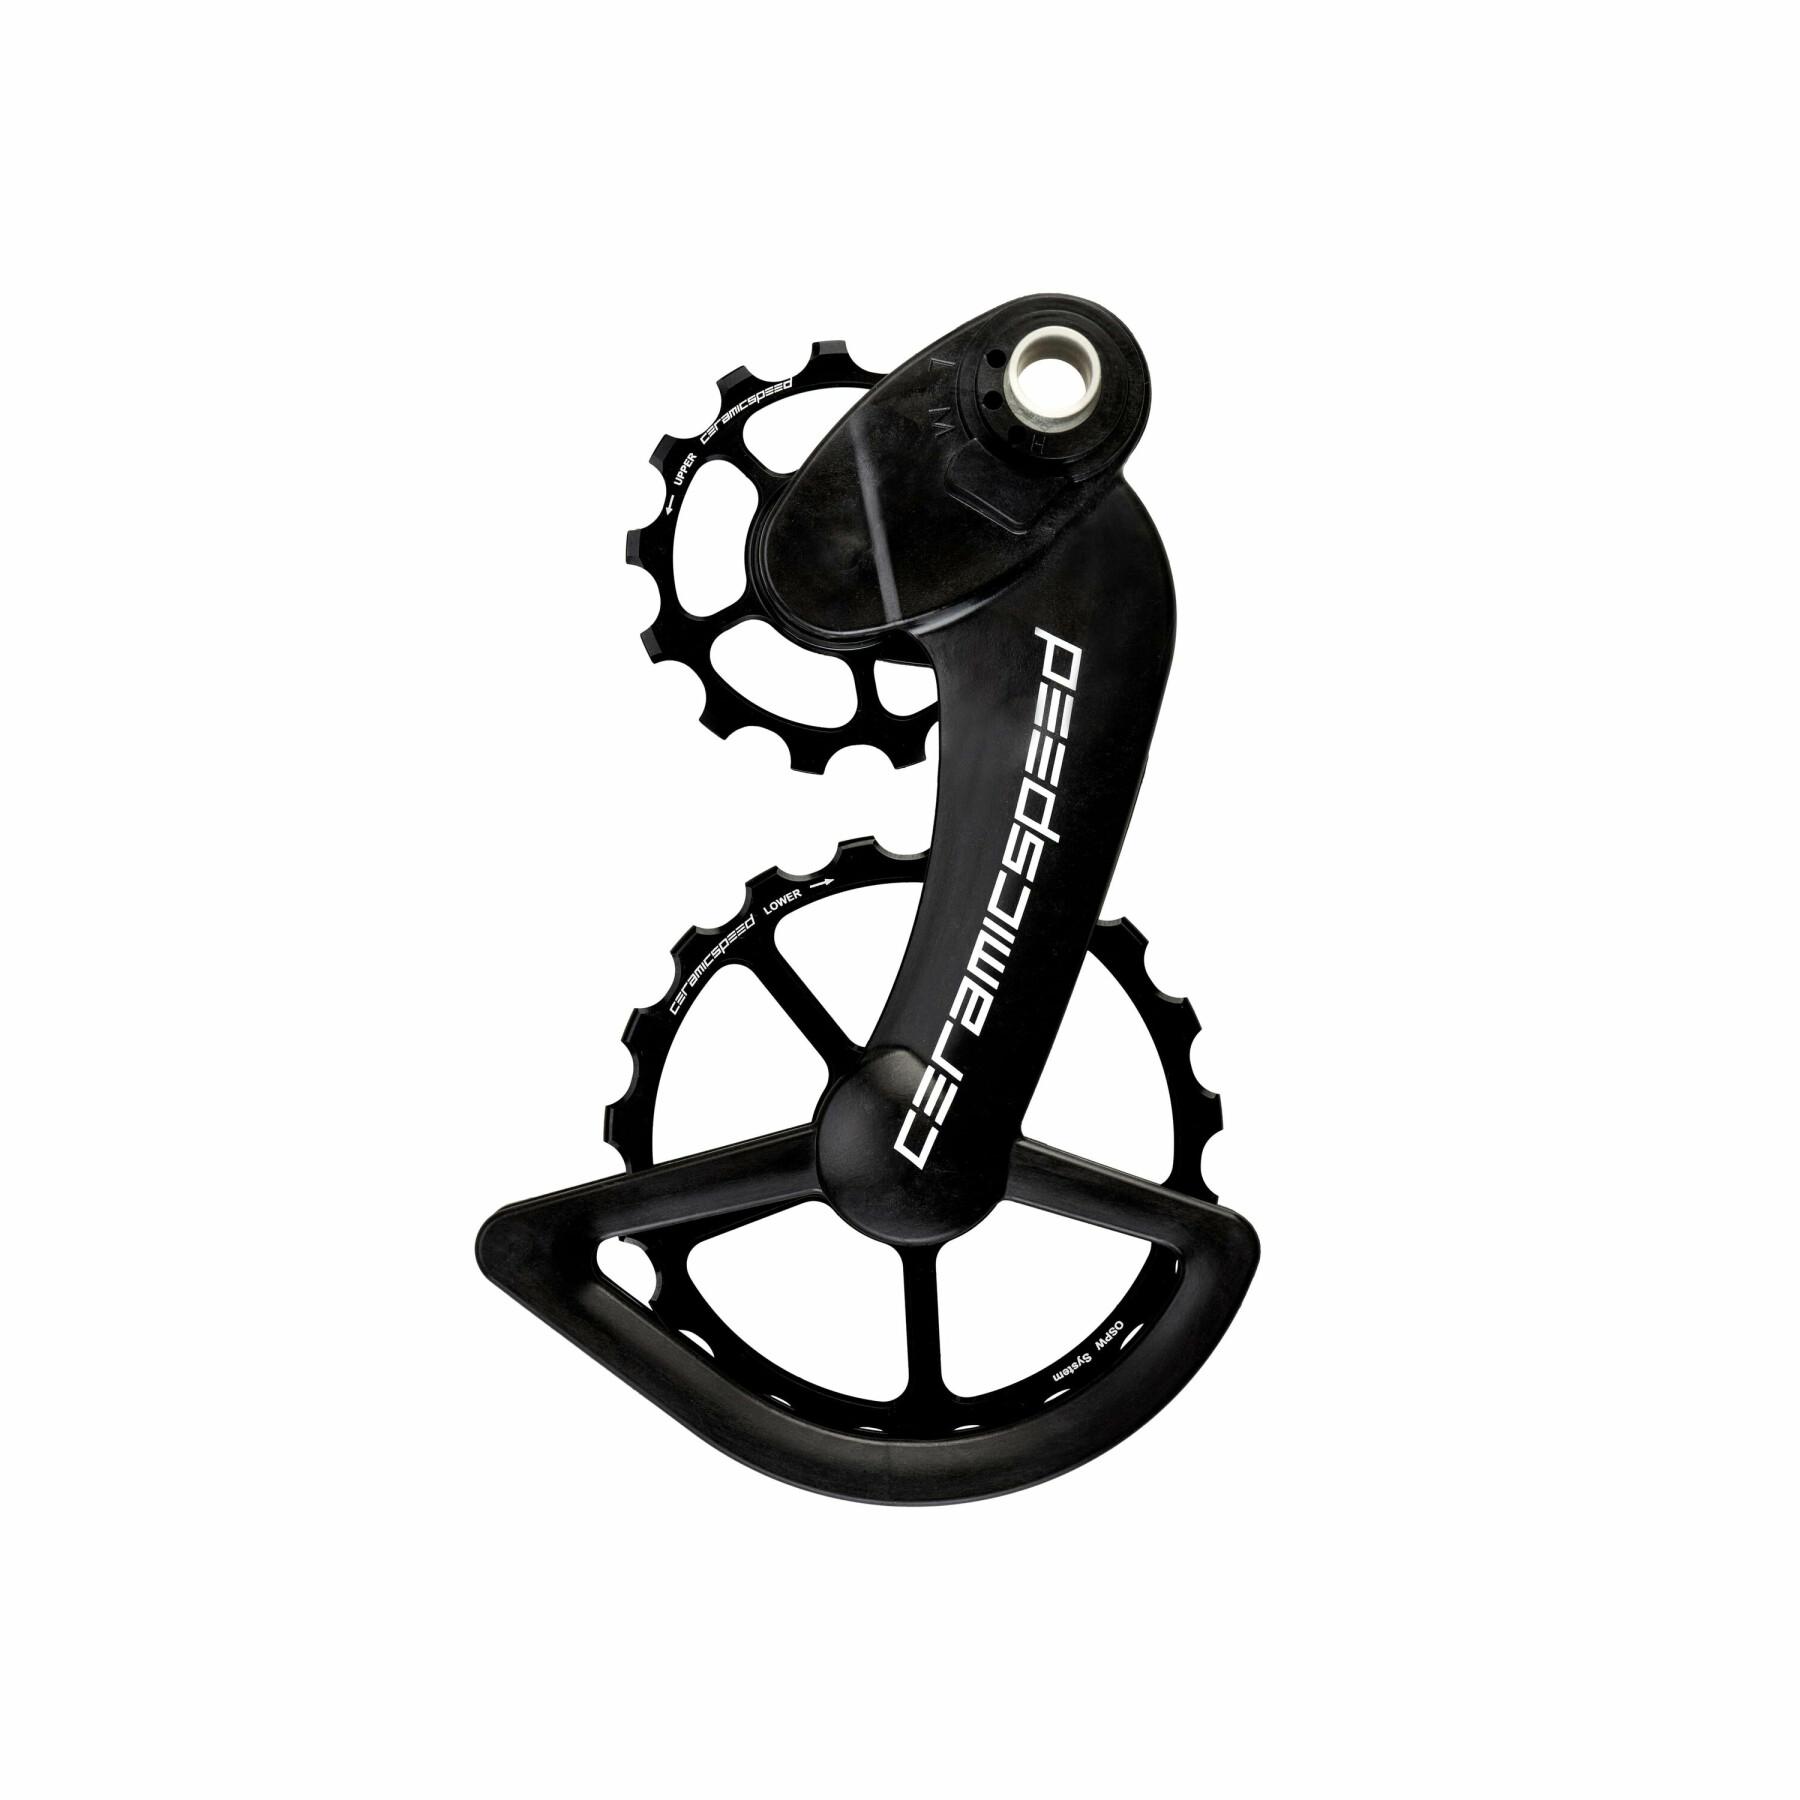 Estrich CeramicSpeed OSPW Campagnolo 12v eps black alloy 607 stainless steel